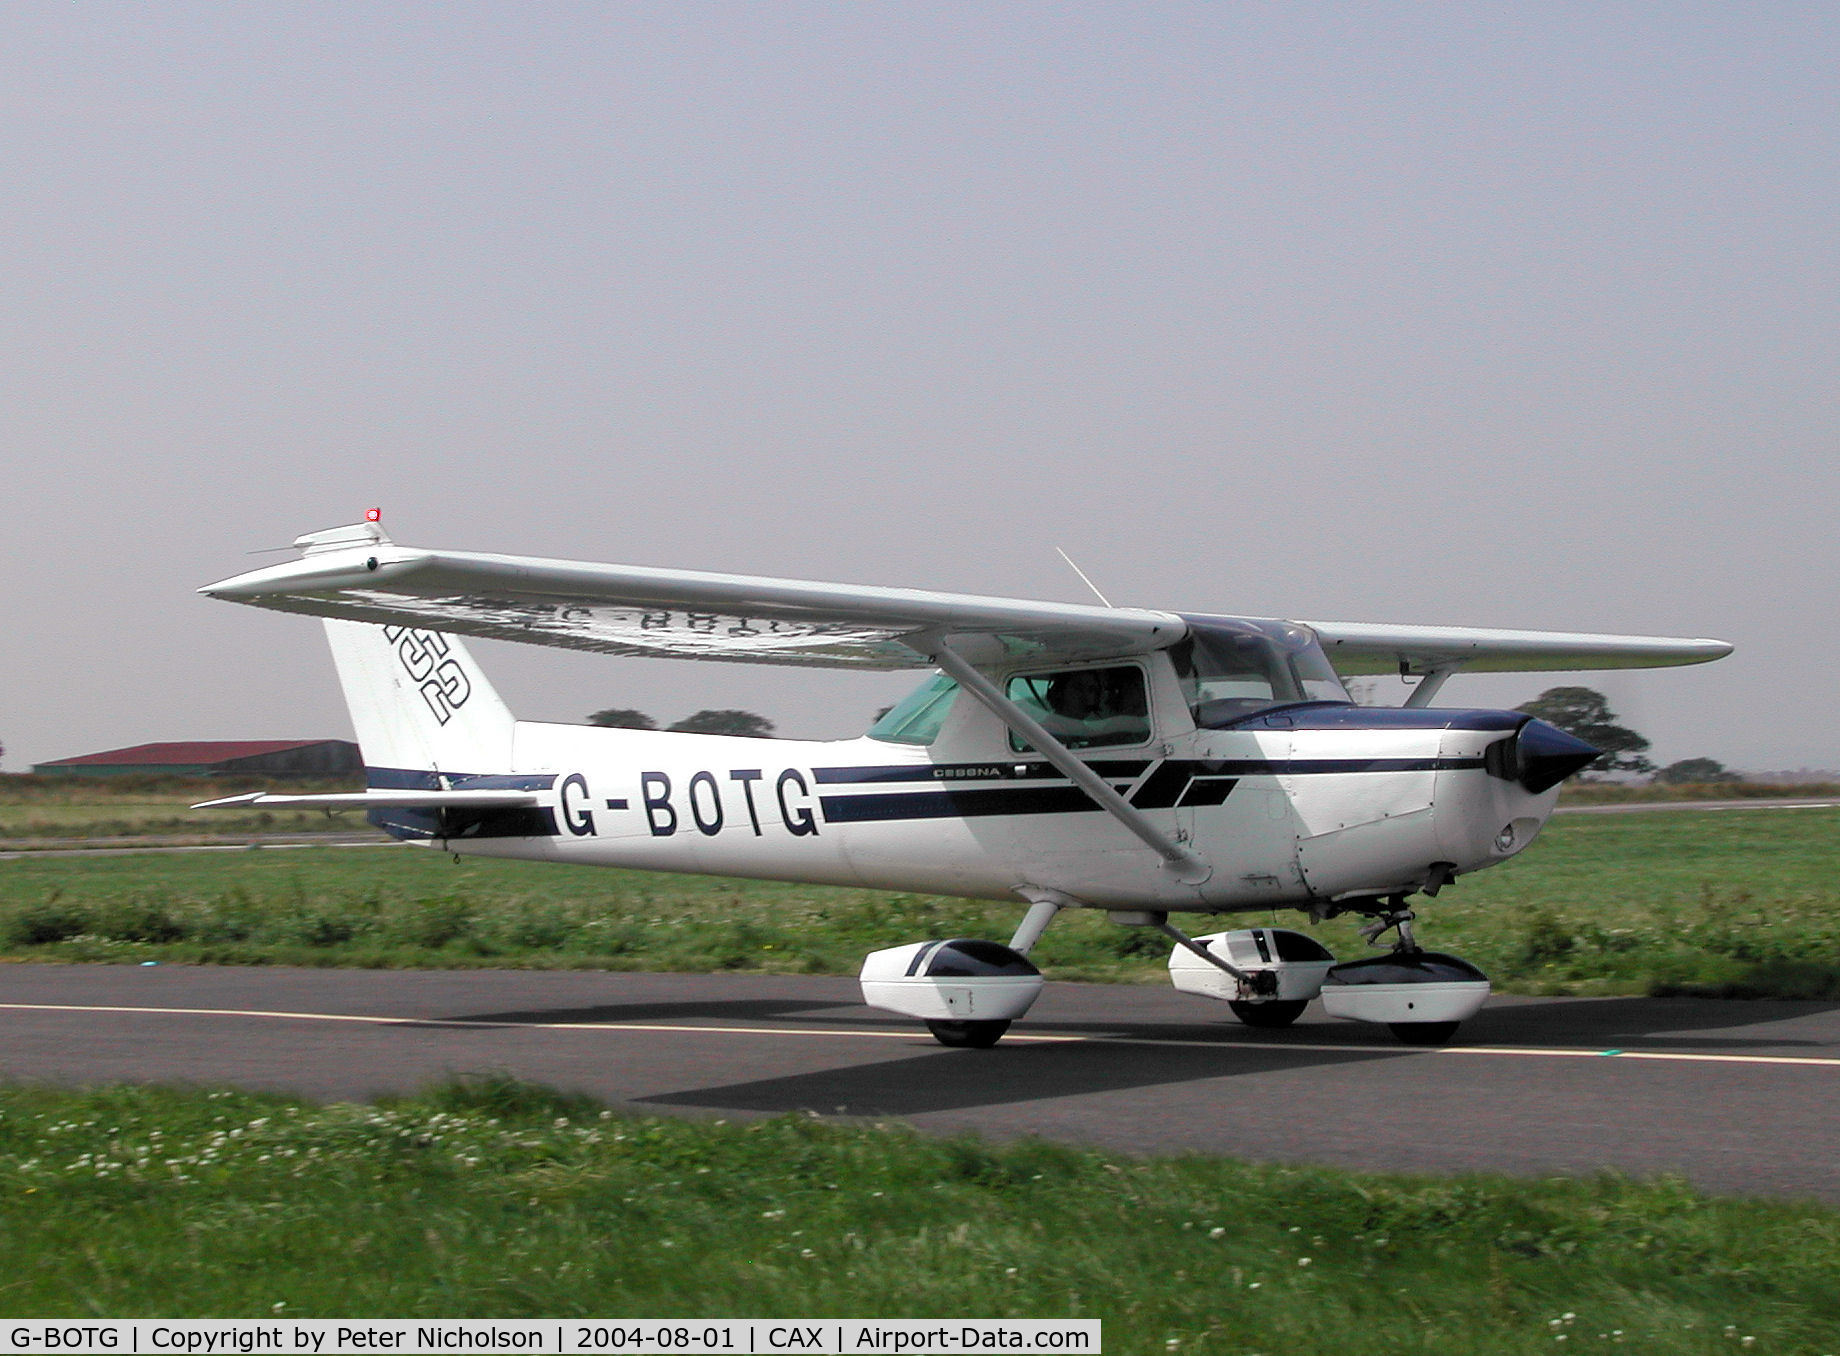 G-BOTG, 1978 Cessna 152 C/N 152-83035, This Cessna 152 attended the 2004 Carlisle Fly-in.